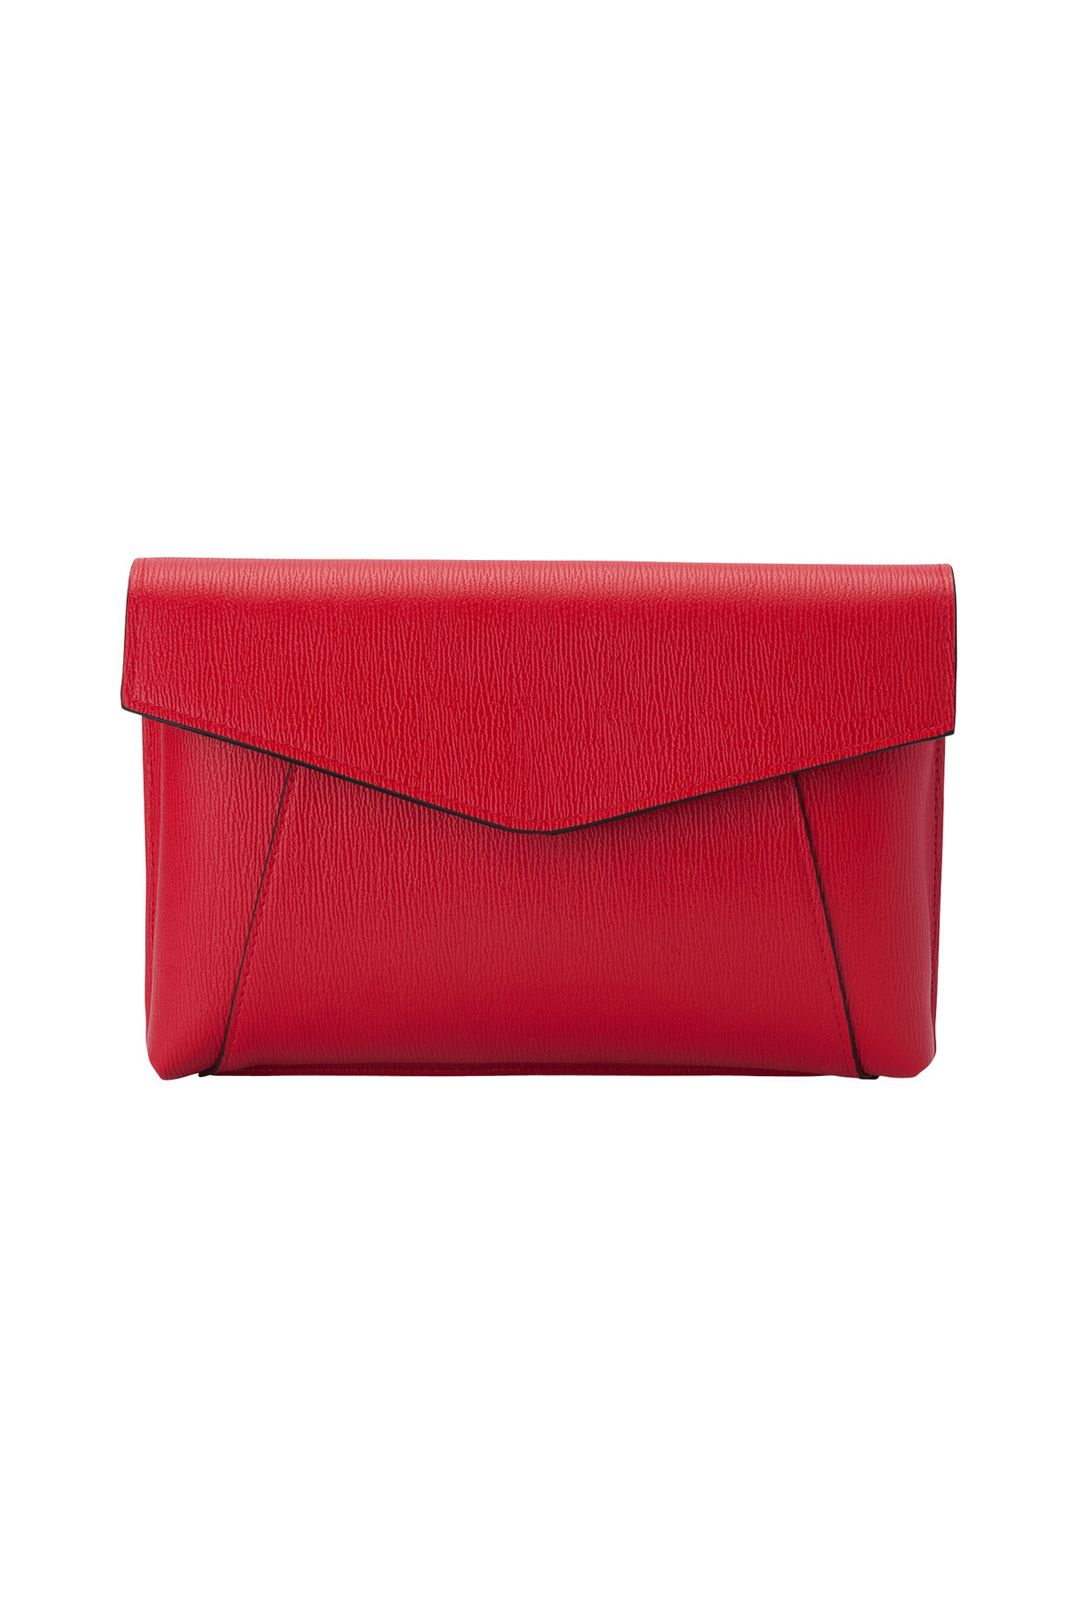 Olga Berg - Andrea Wide Foldover Clutch - Red - Front